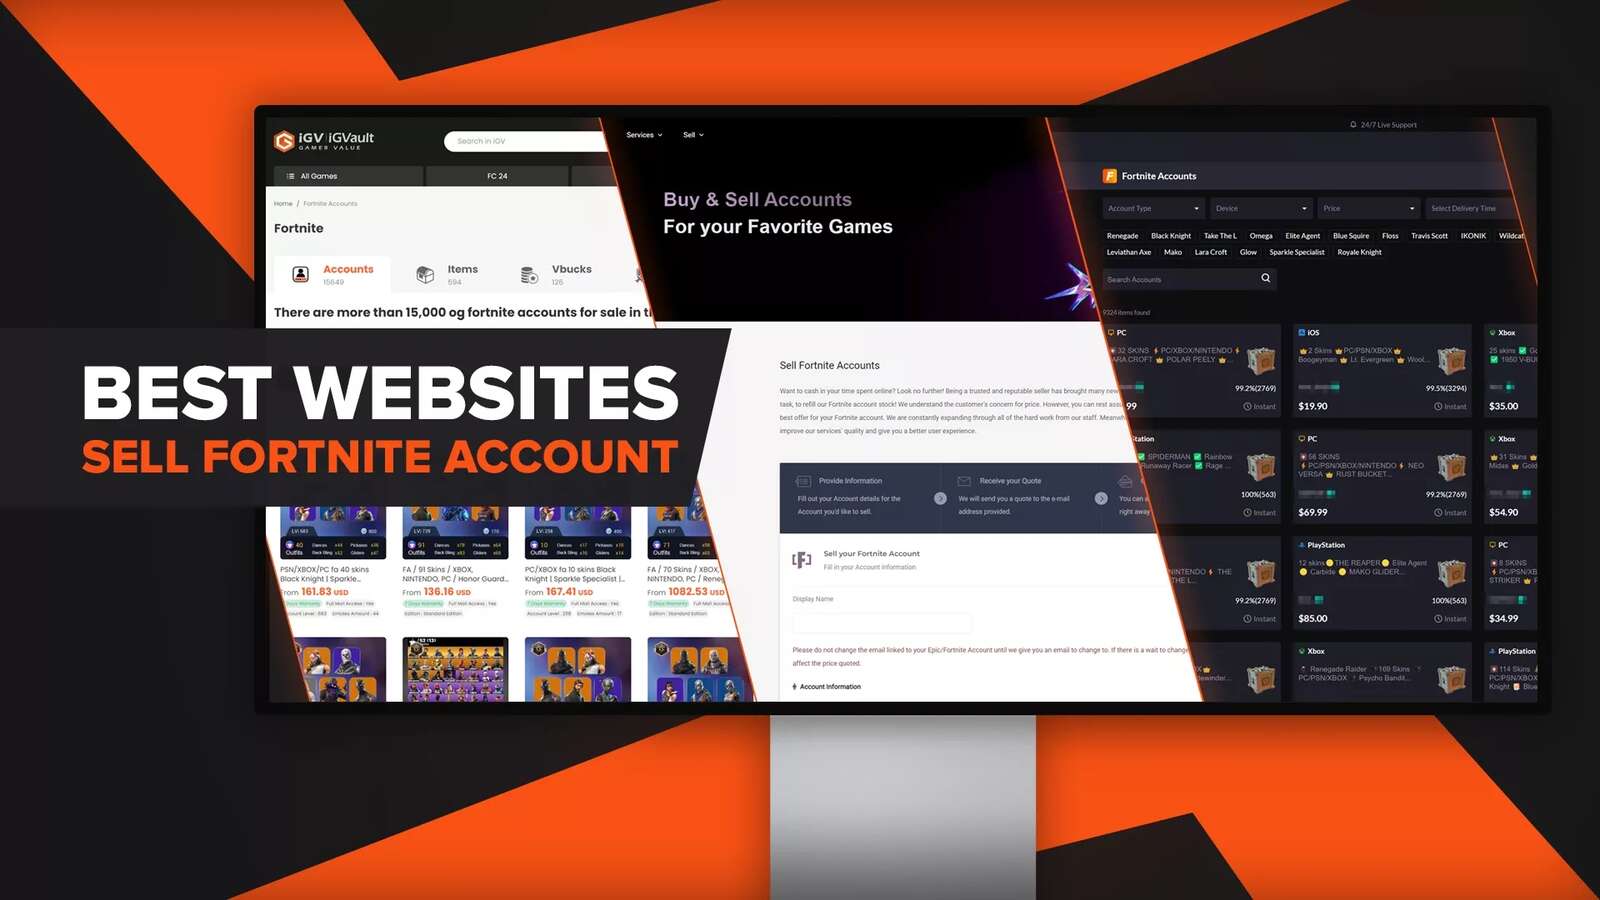 Best Sites to Sell Fortnite Account [Top 5 List]